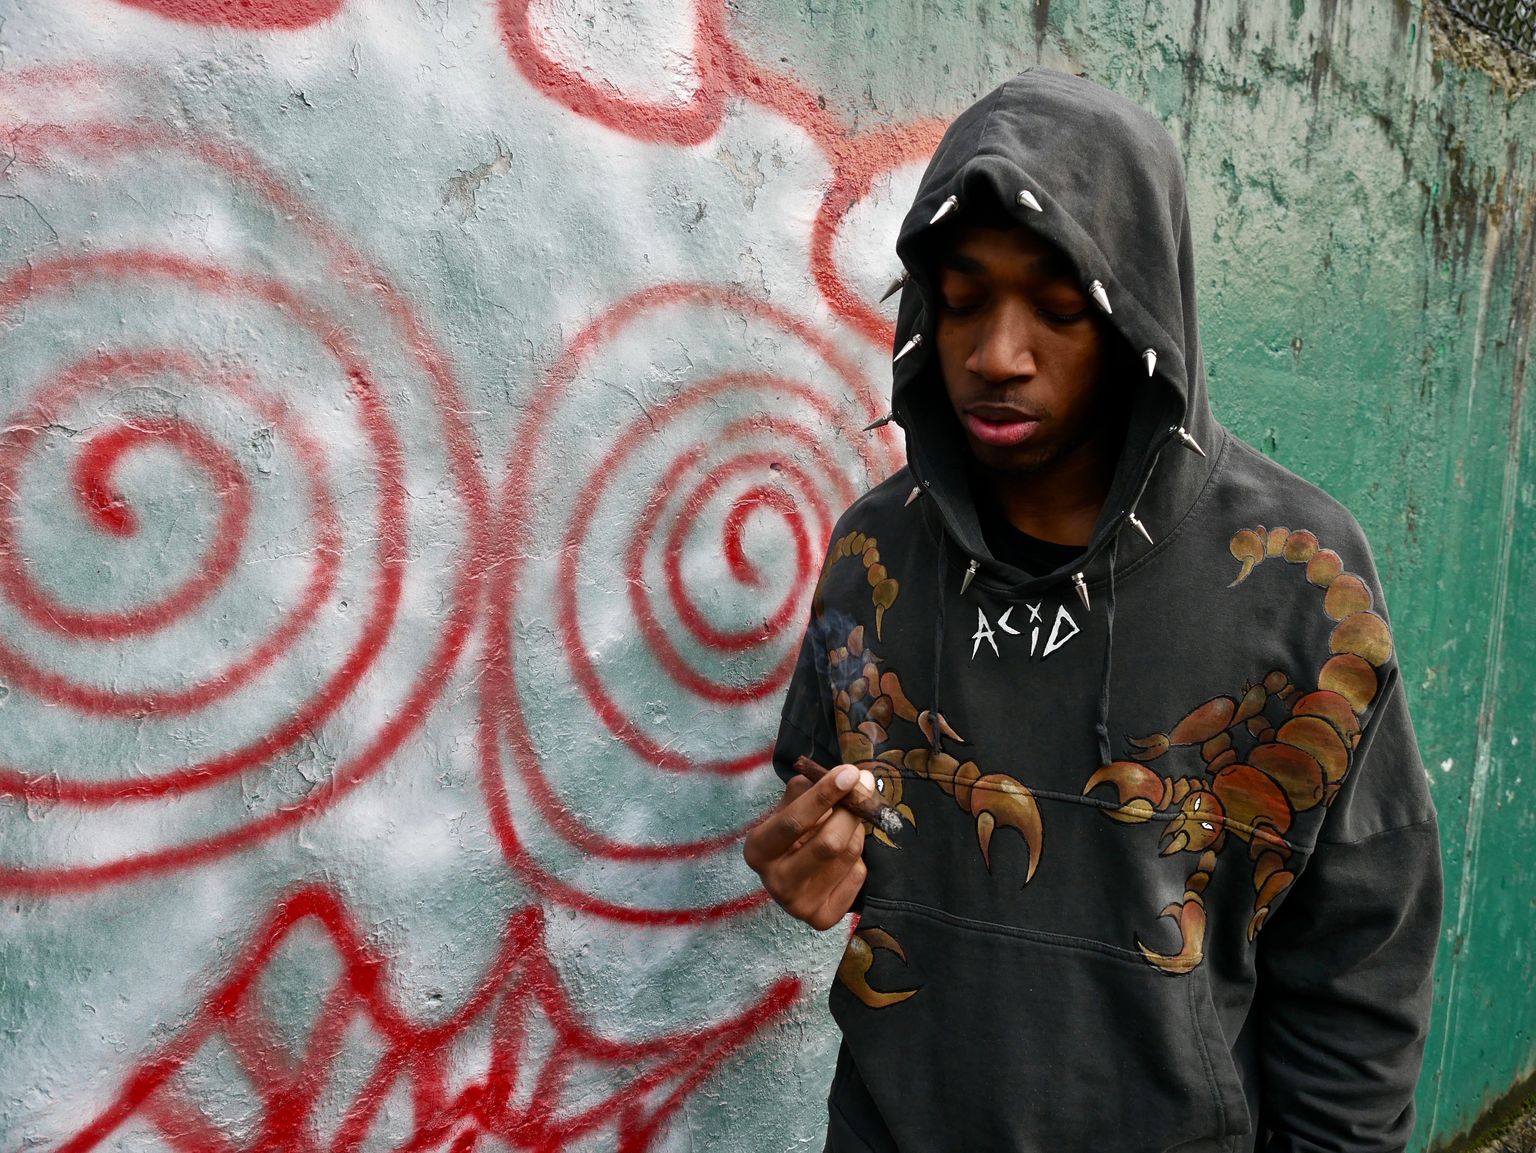 @crrksy wearing a one of a kind hand painted ACiD scorpion hoodie